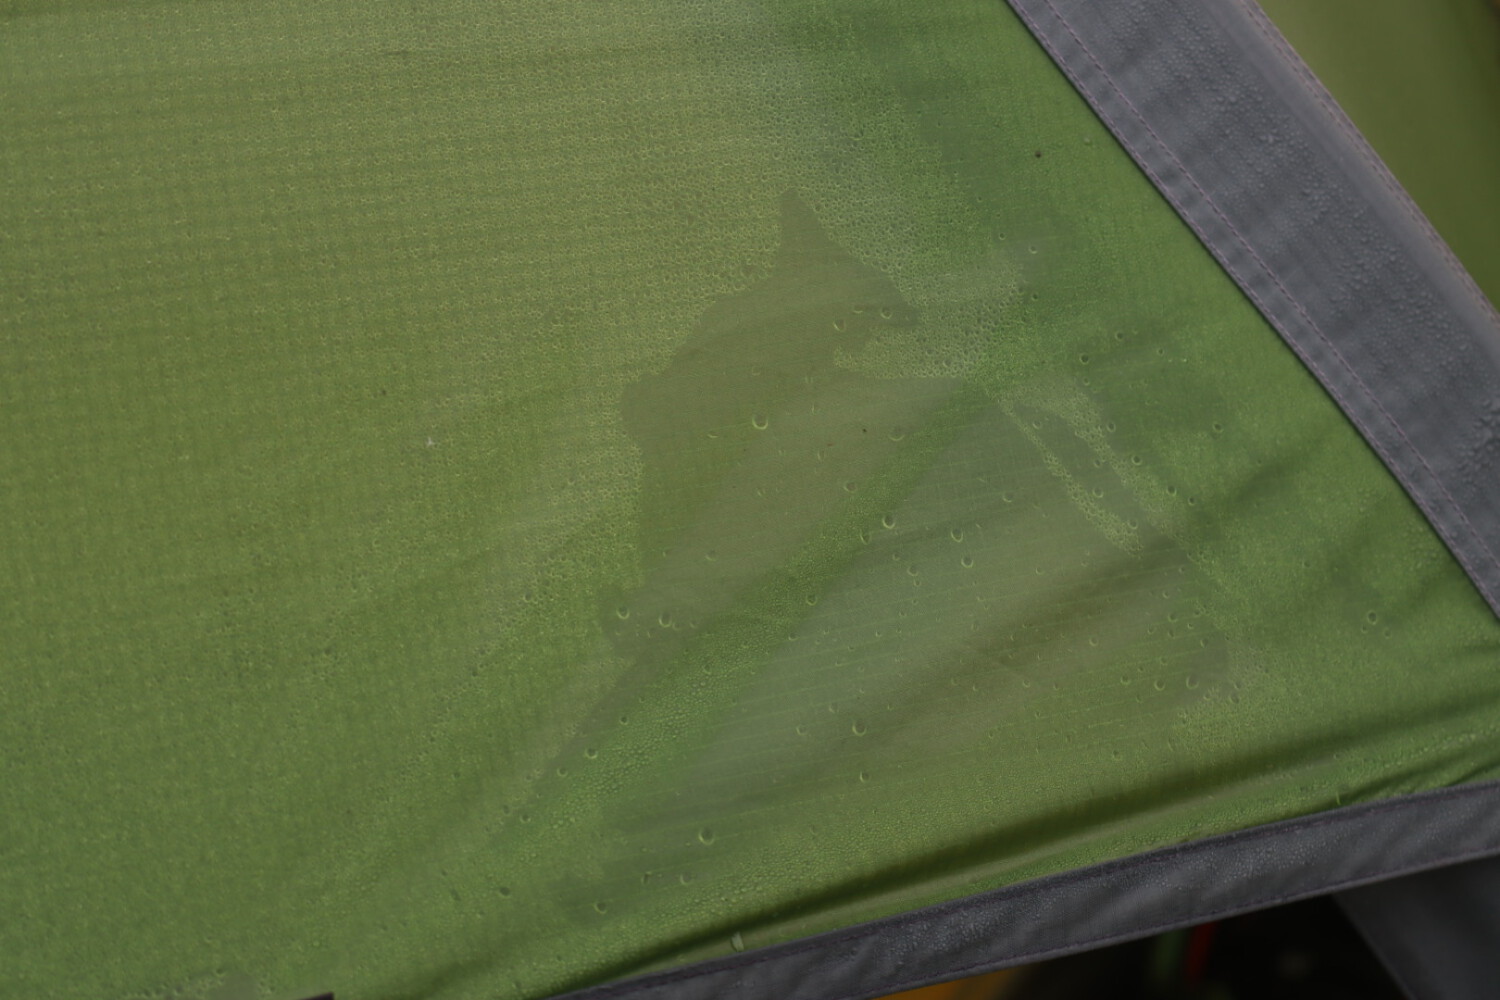 Our wet tent after a cold night